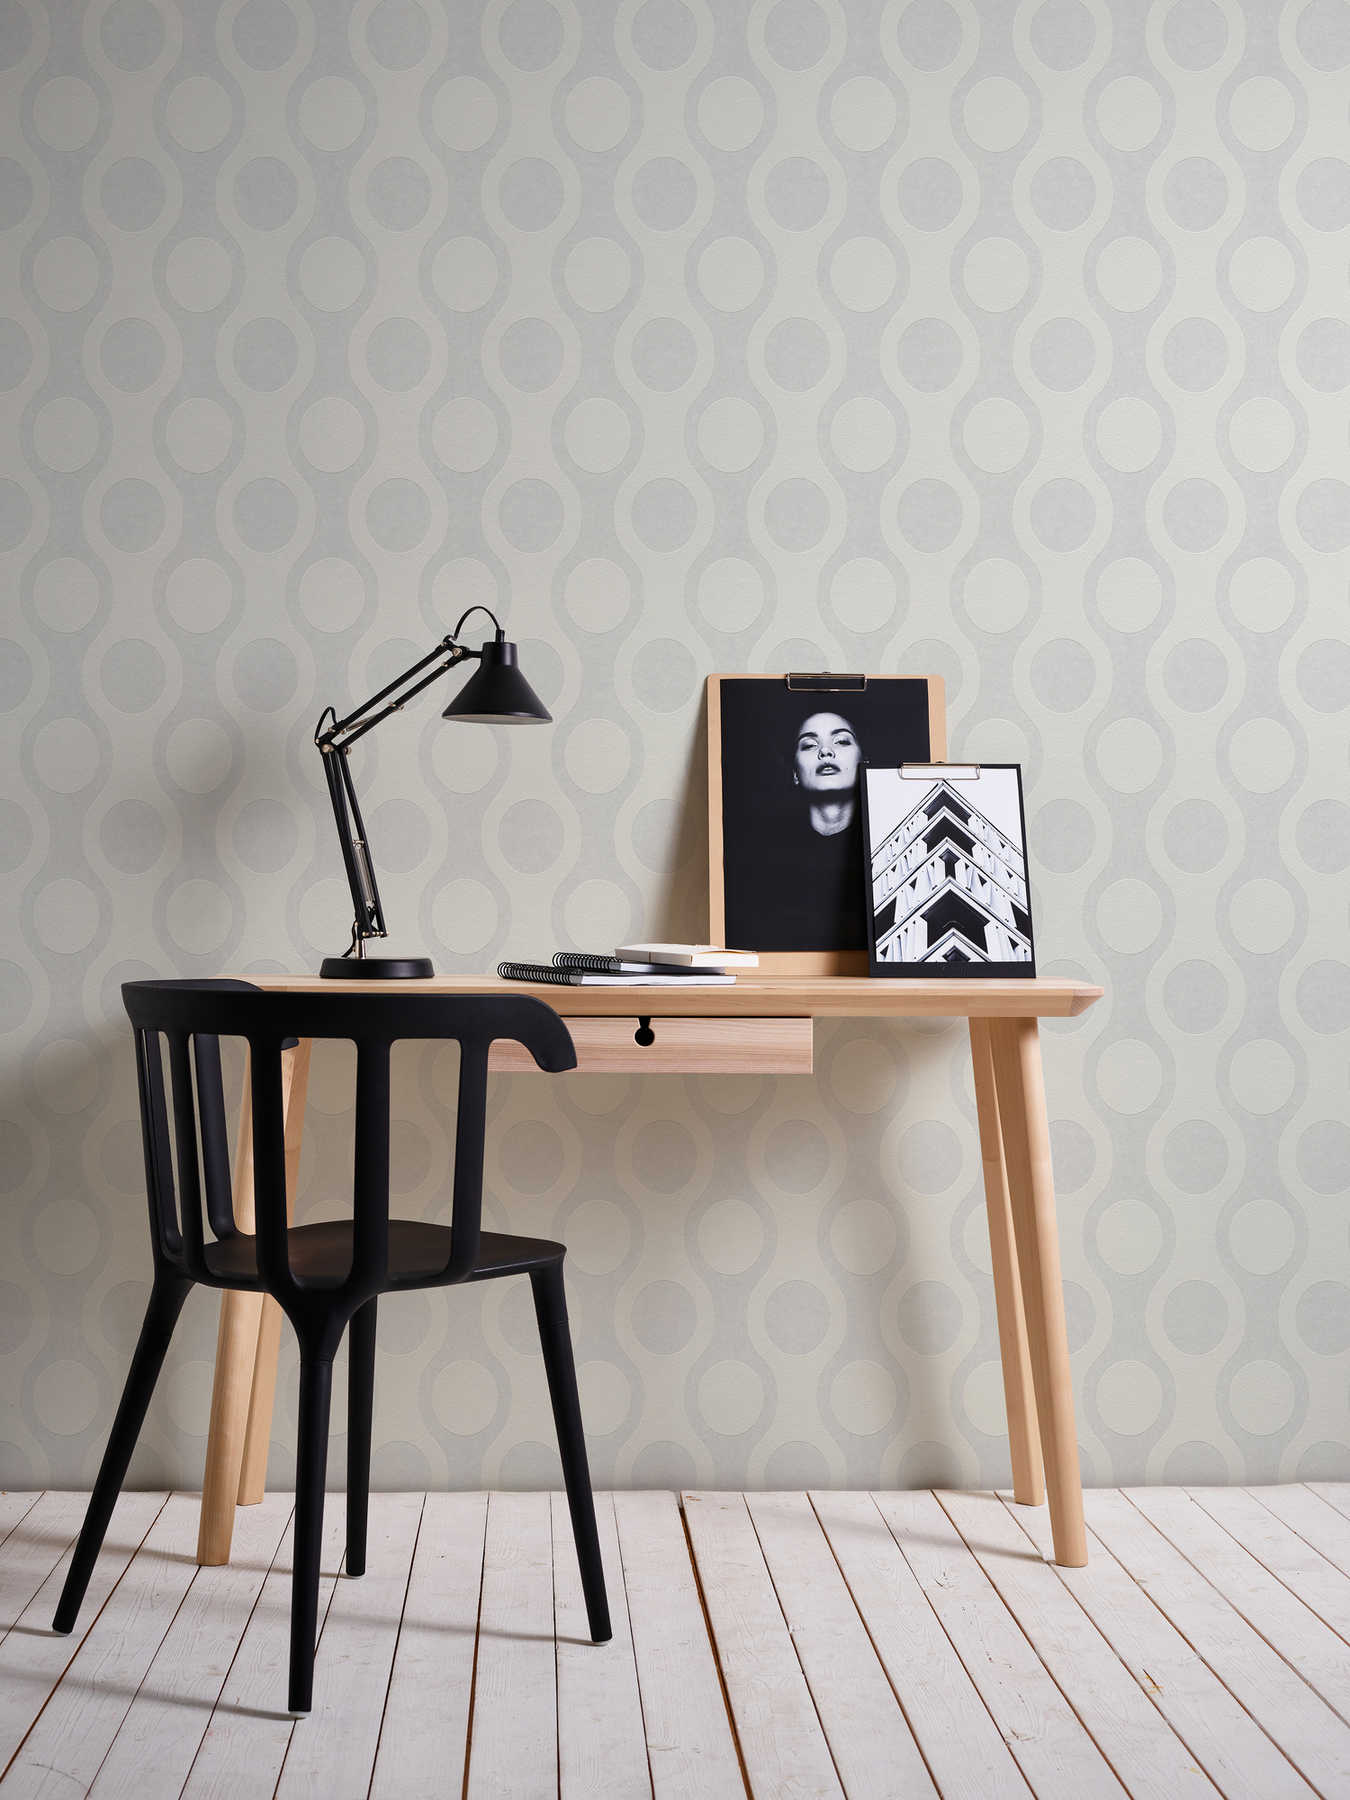             Paintable wallpaper with 60s retro circle pattern - white
        